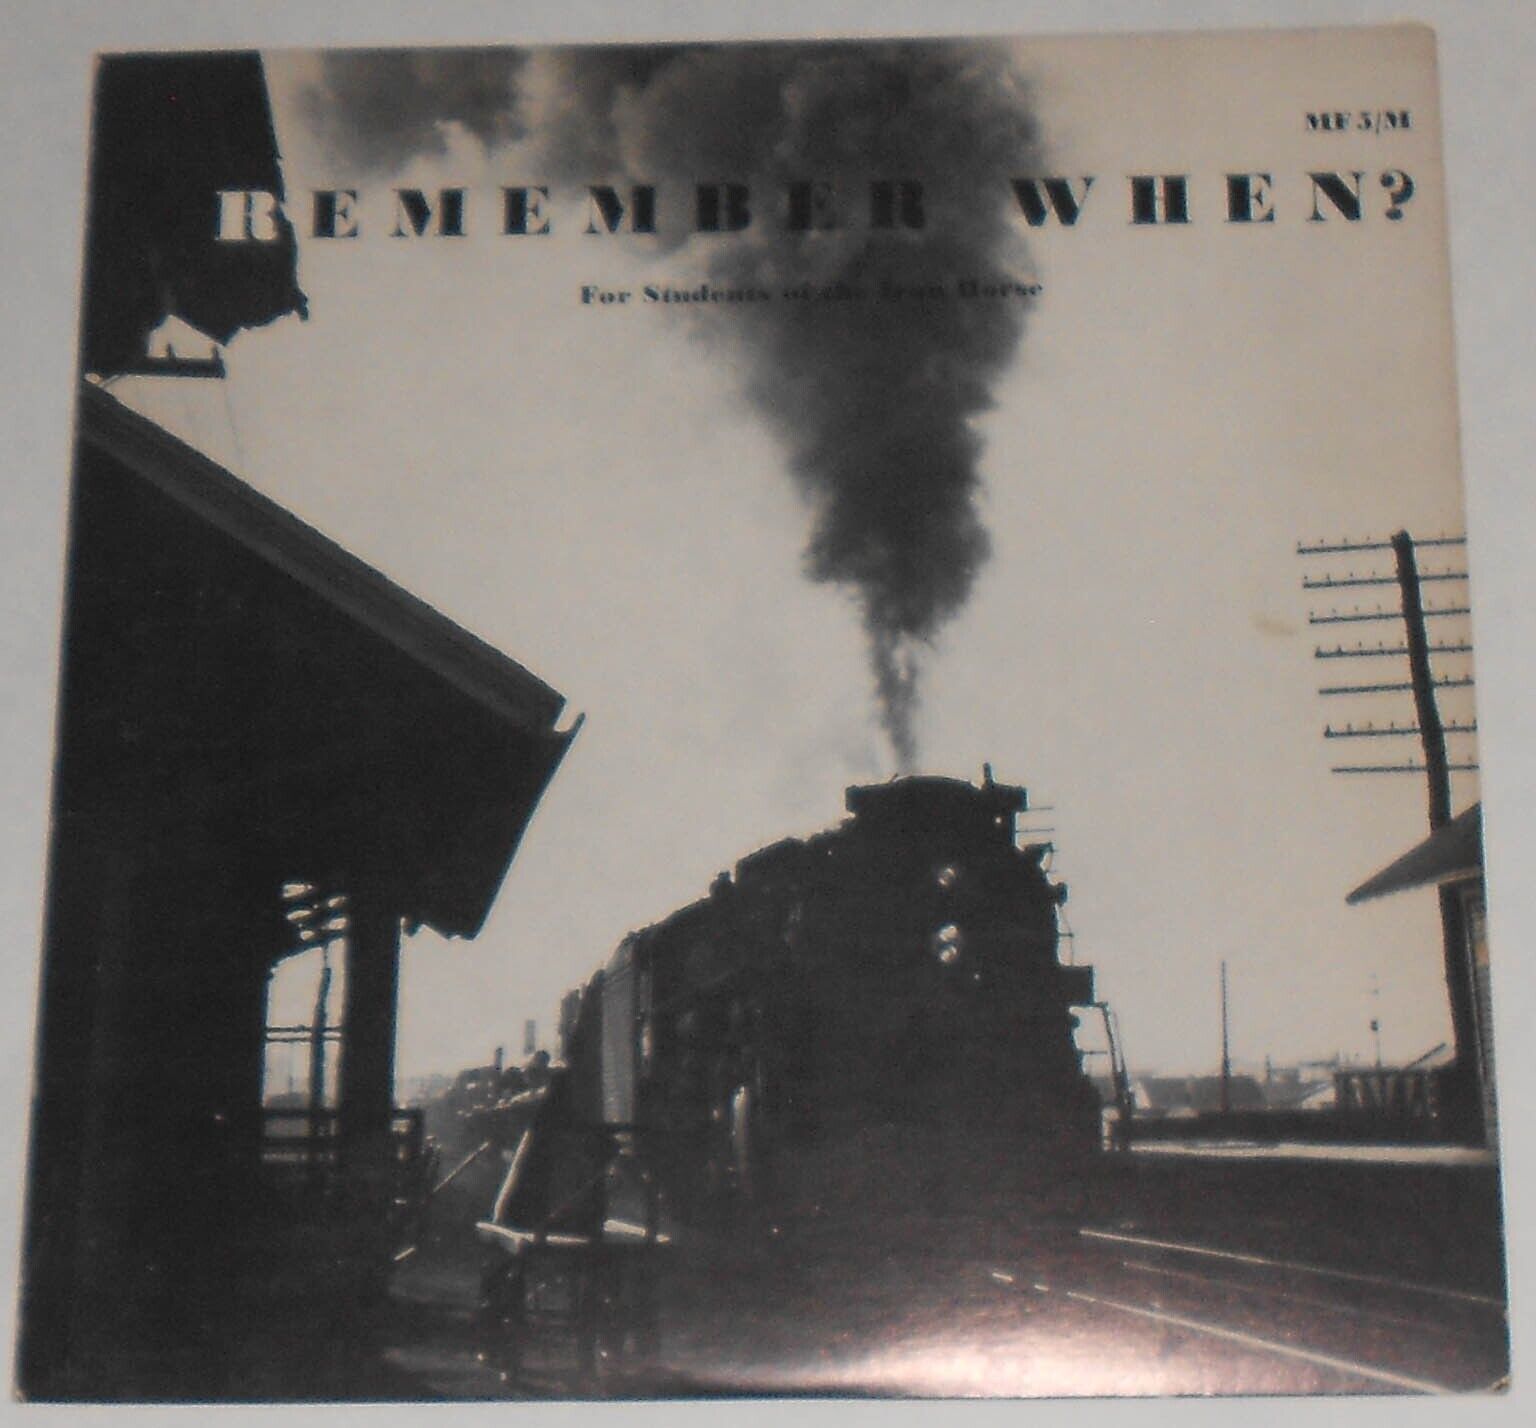 REMEMBER WHEN? 1960 LP Record - Railroad Sounds of Steam Locomotives MF-5 RR